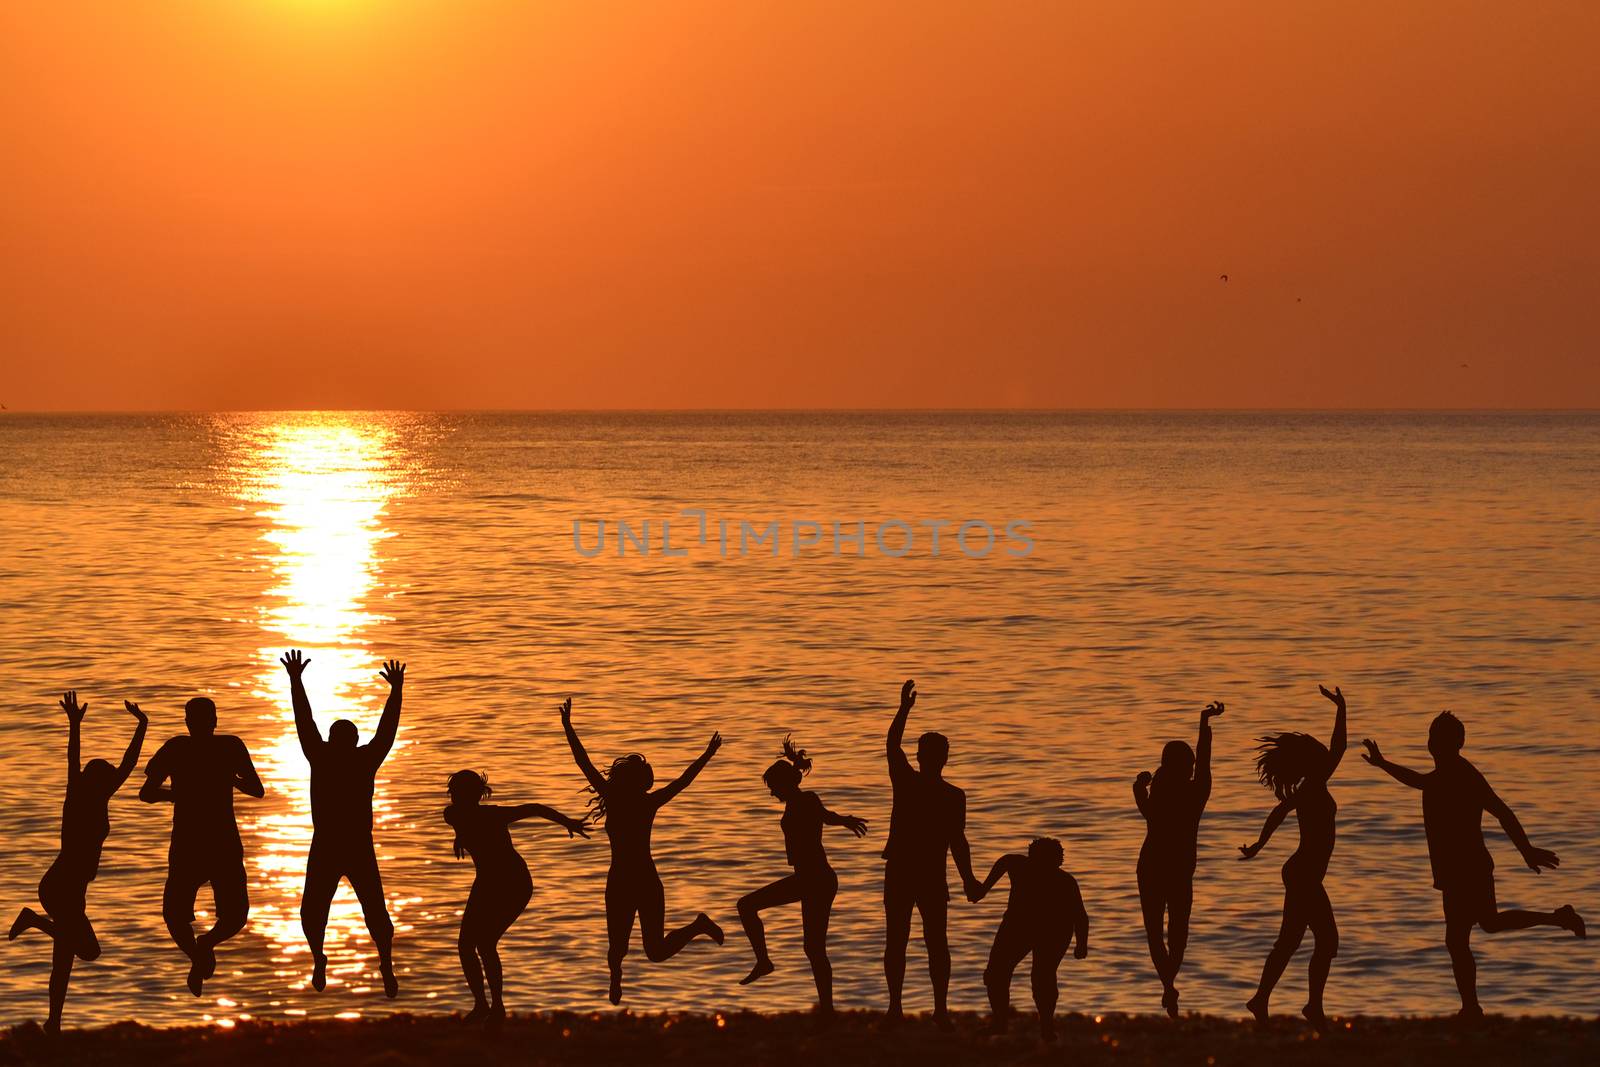 Men and women jumping and enjoying life at sunrise on the beach by hibrida13